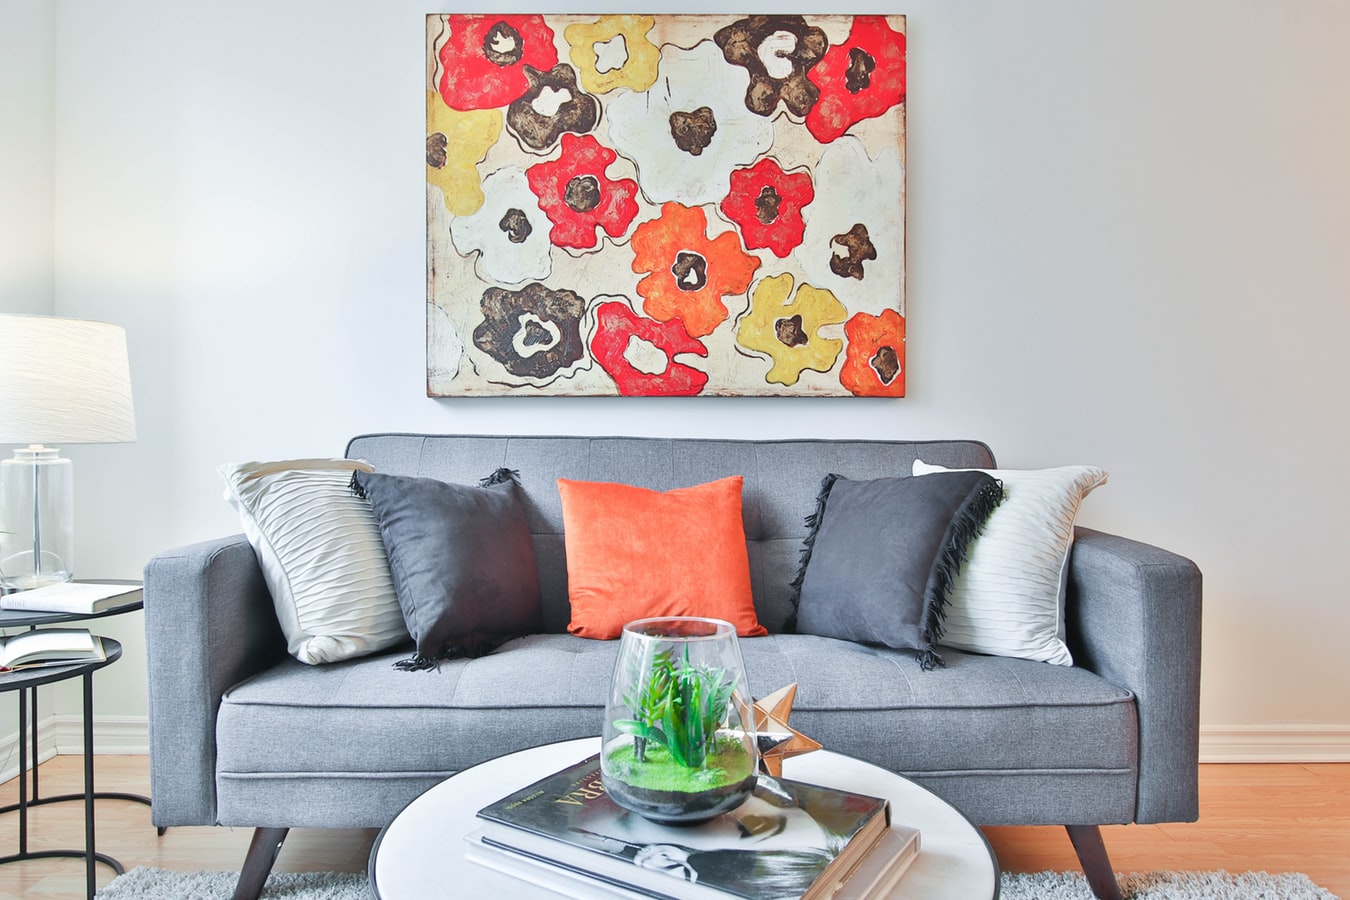 5 Ways To Be More Expressive With Your Home Decor | Uncustomary